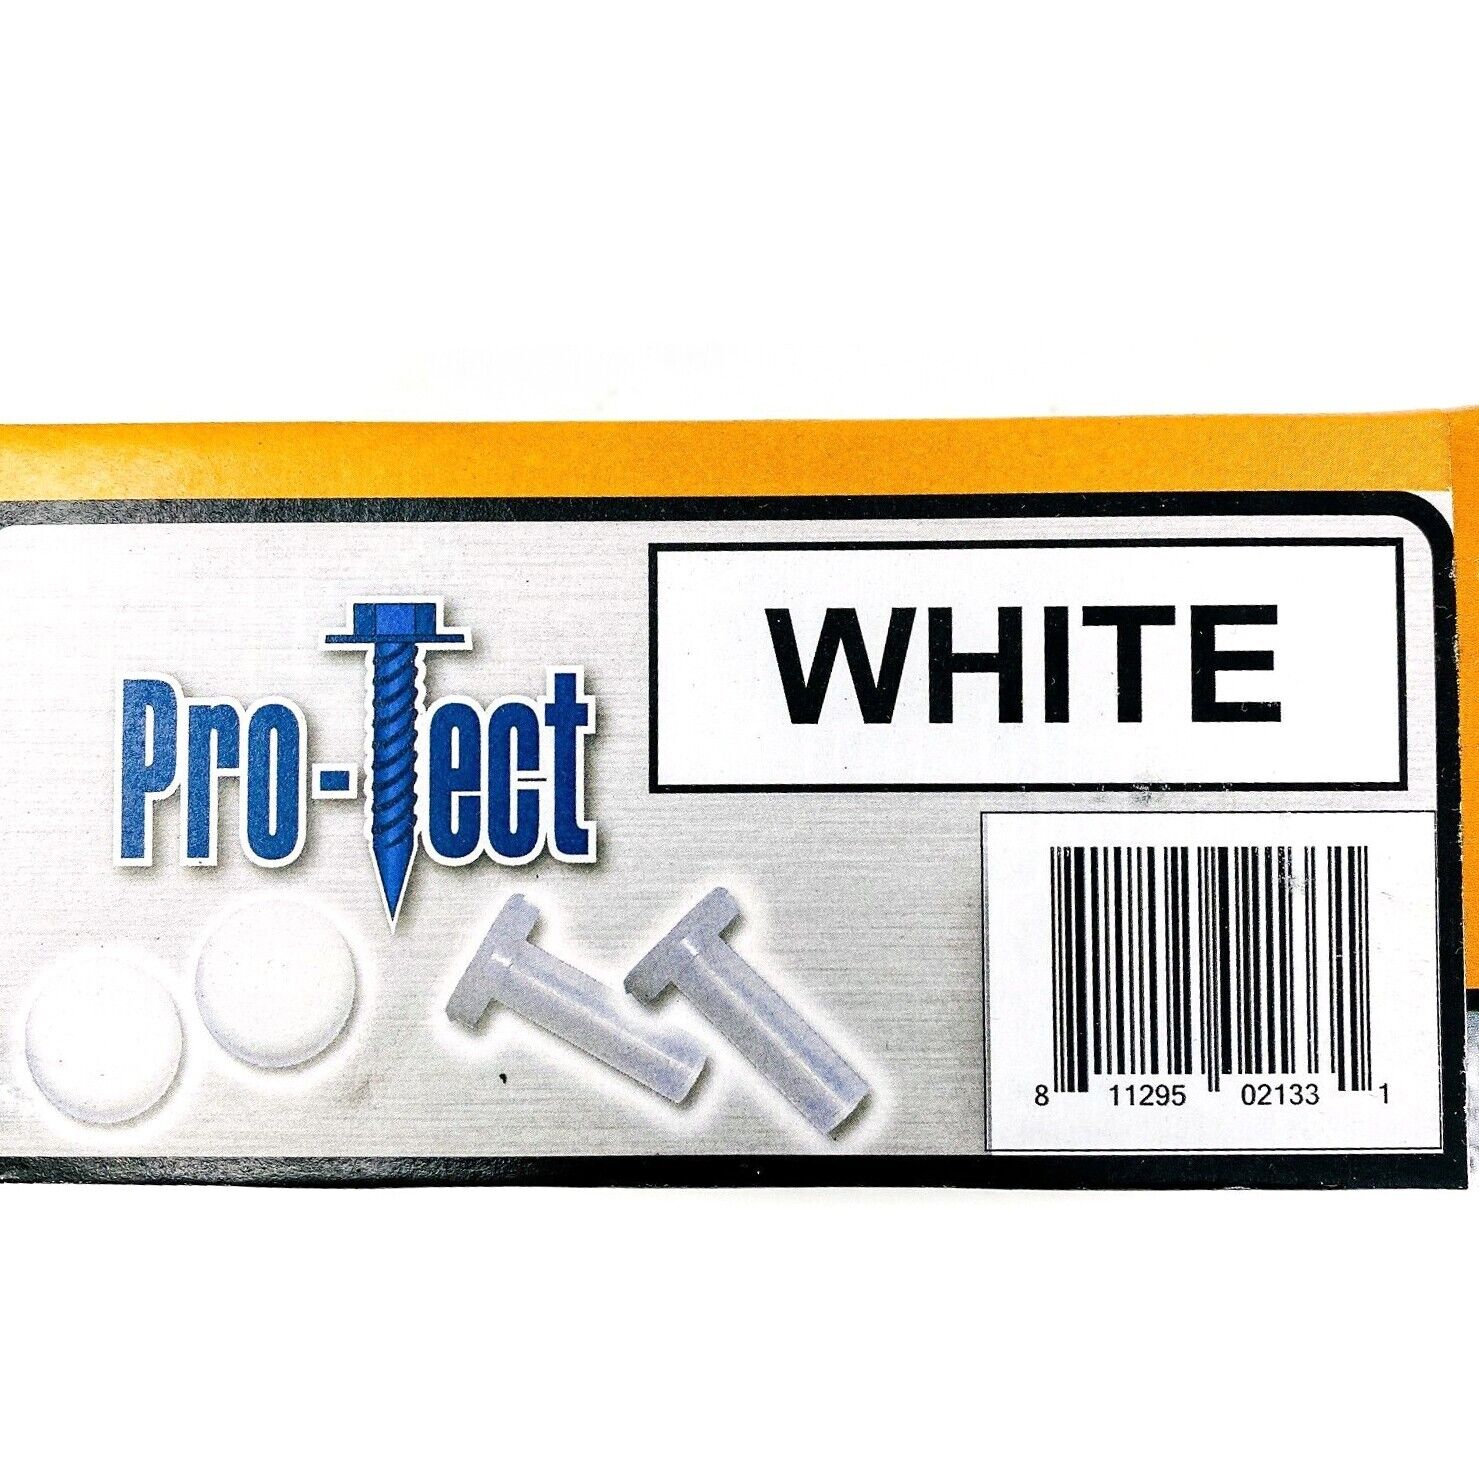 200 pcs Set Pro-Tect WHITE Blue-Tap Concrete Screws, Sleeves, Washers and Caps PRO-TECT Does Not Apply - фотография #3